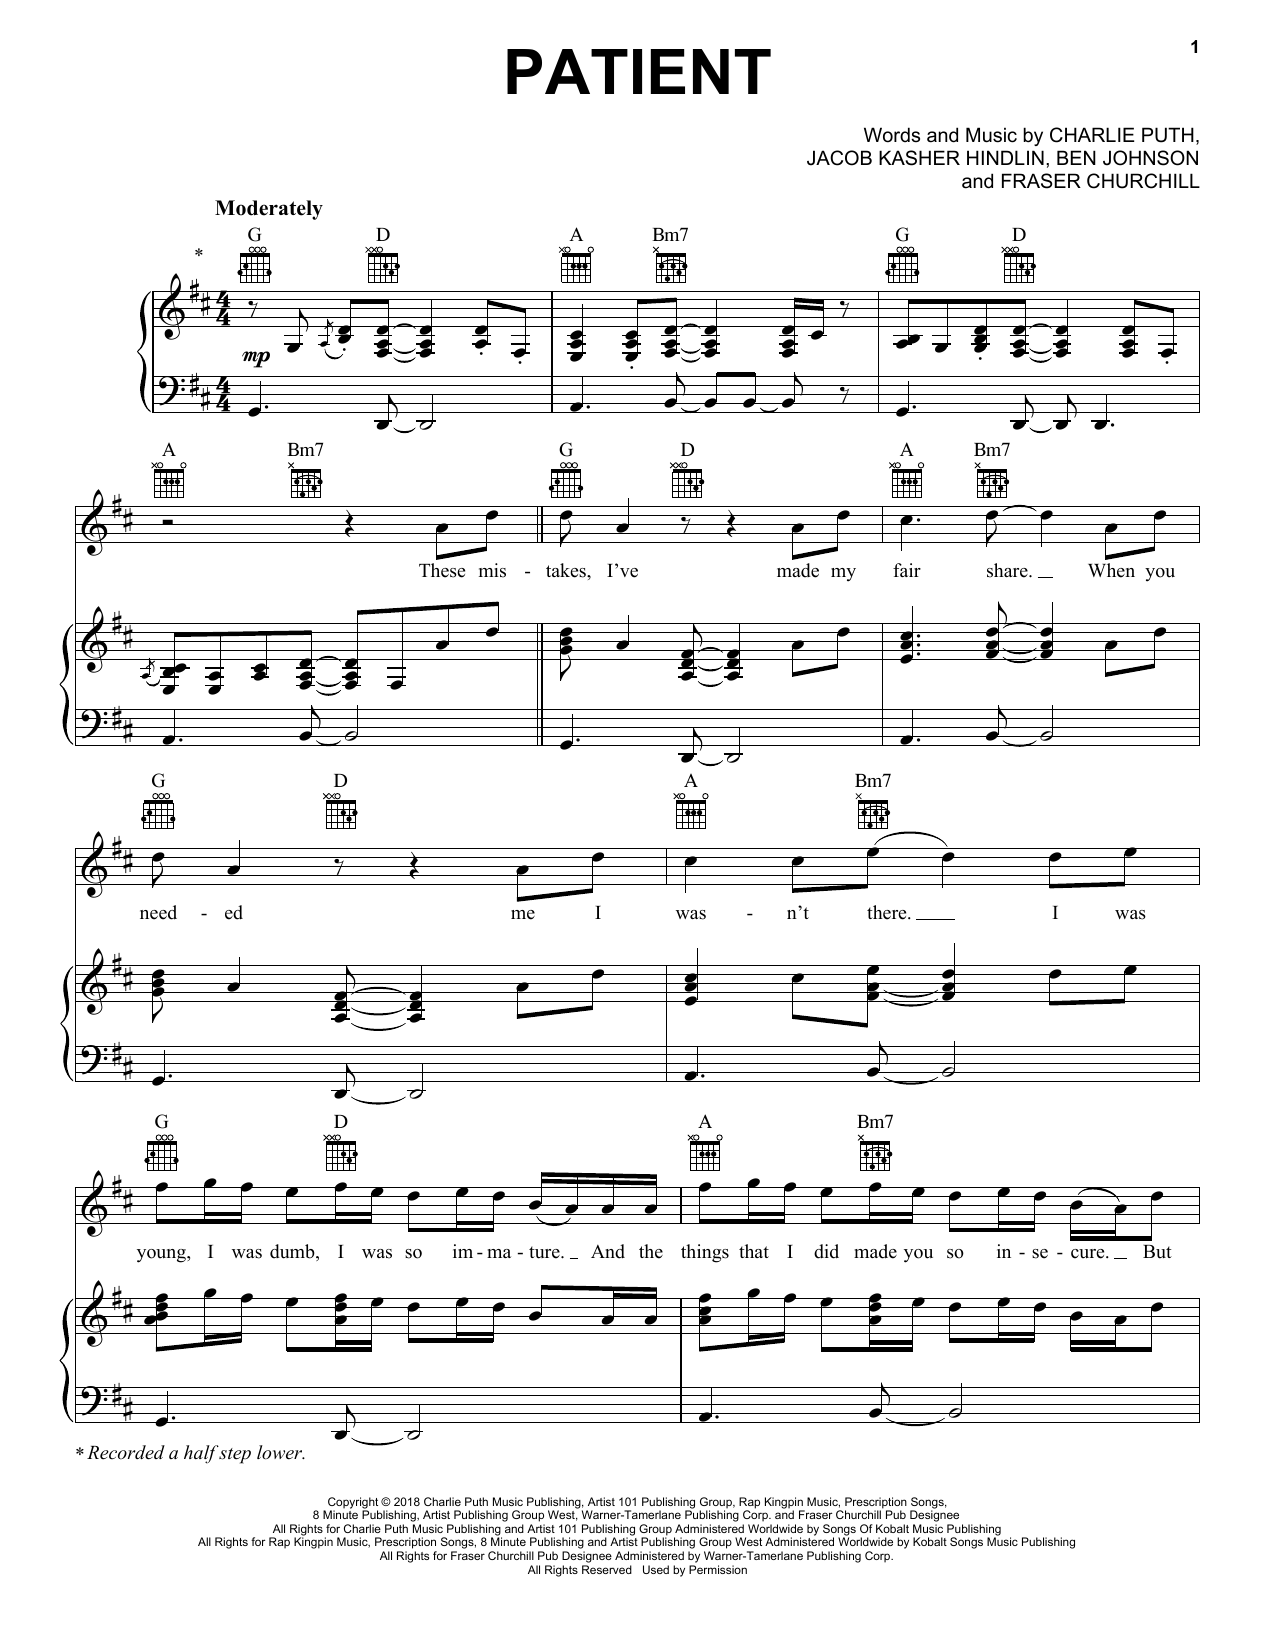 Download Charlie Puth Patient Sheet Music